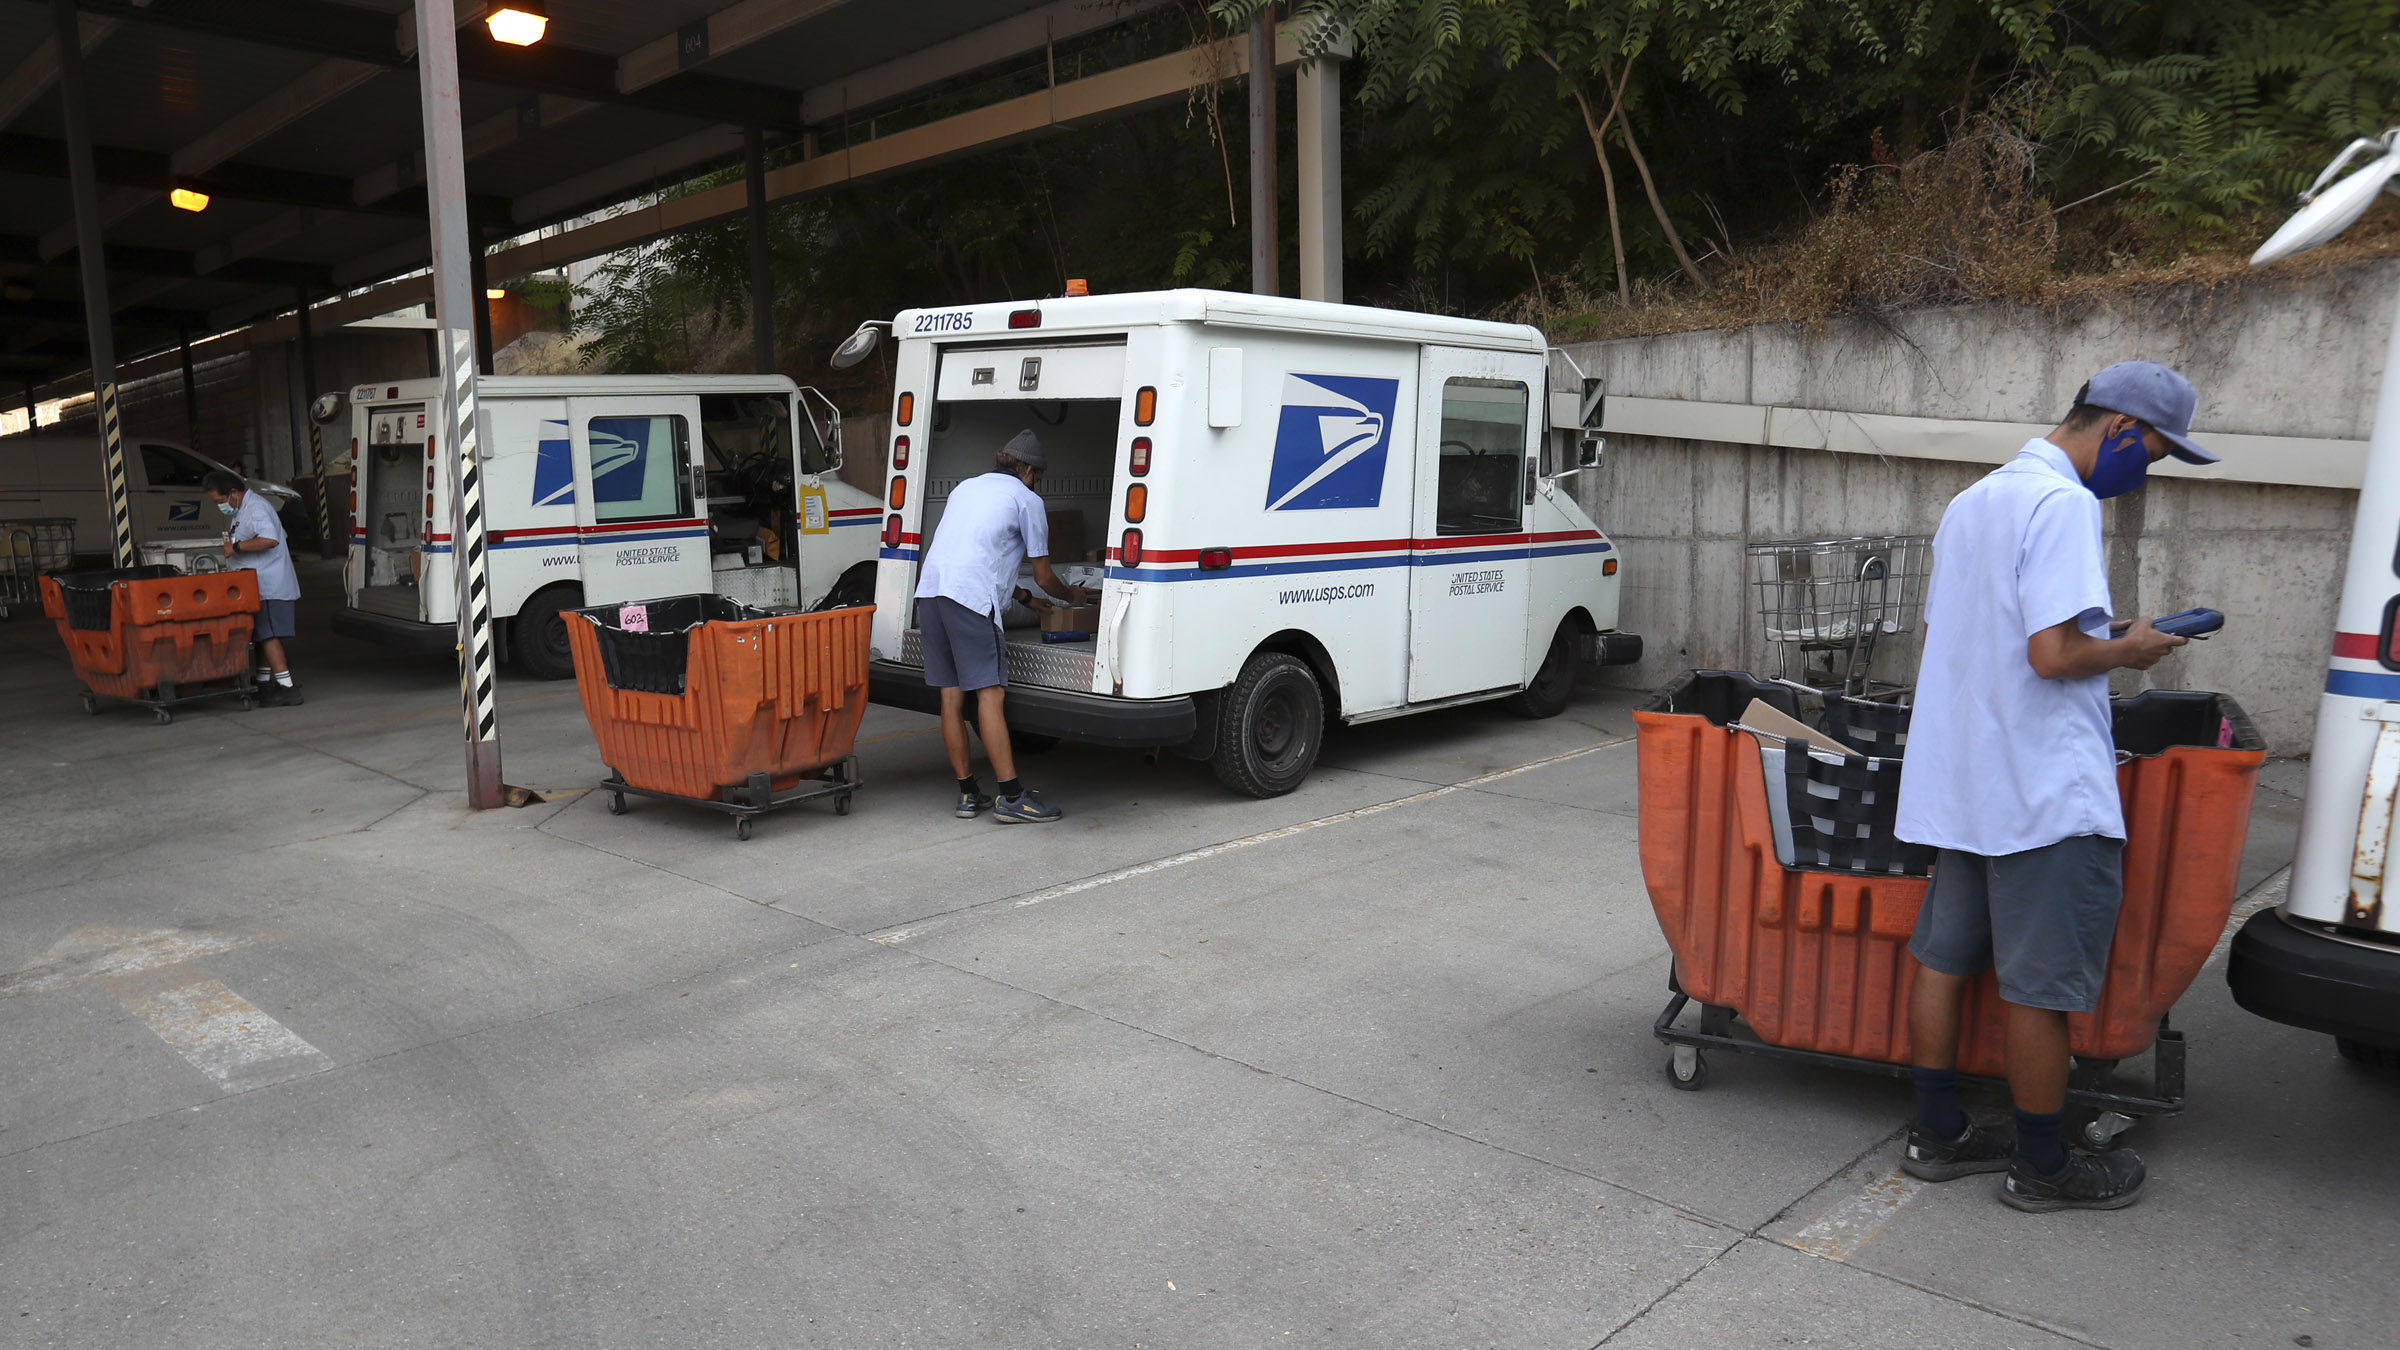 USPS mailmen and cars shown, a mailman was the victim of a robbery in august...